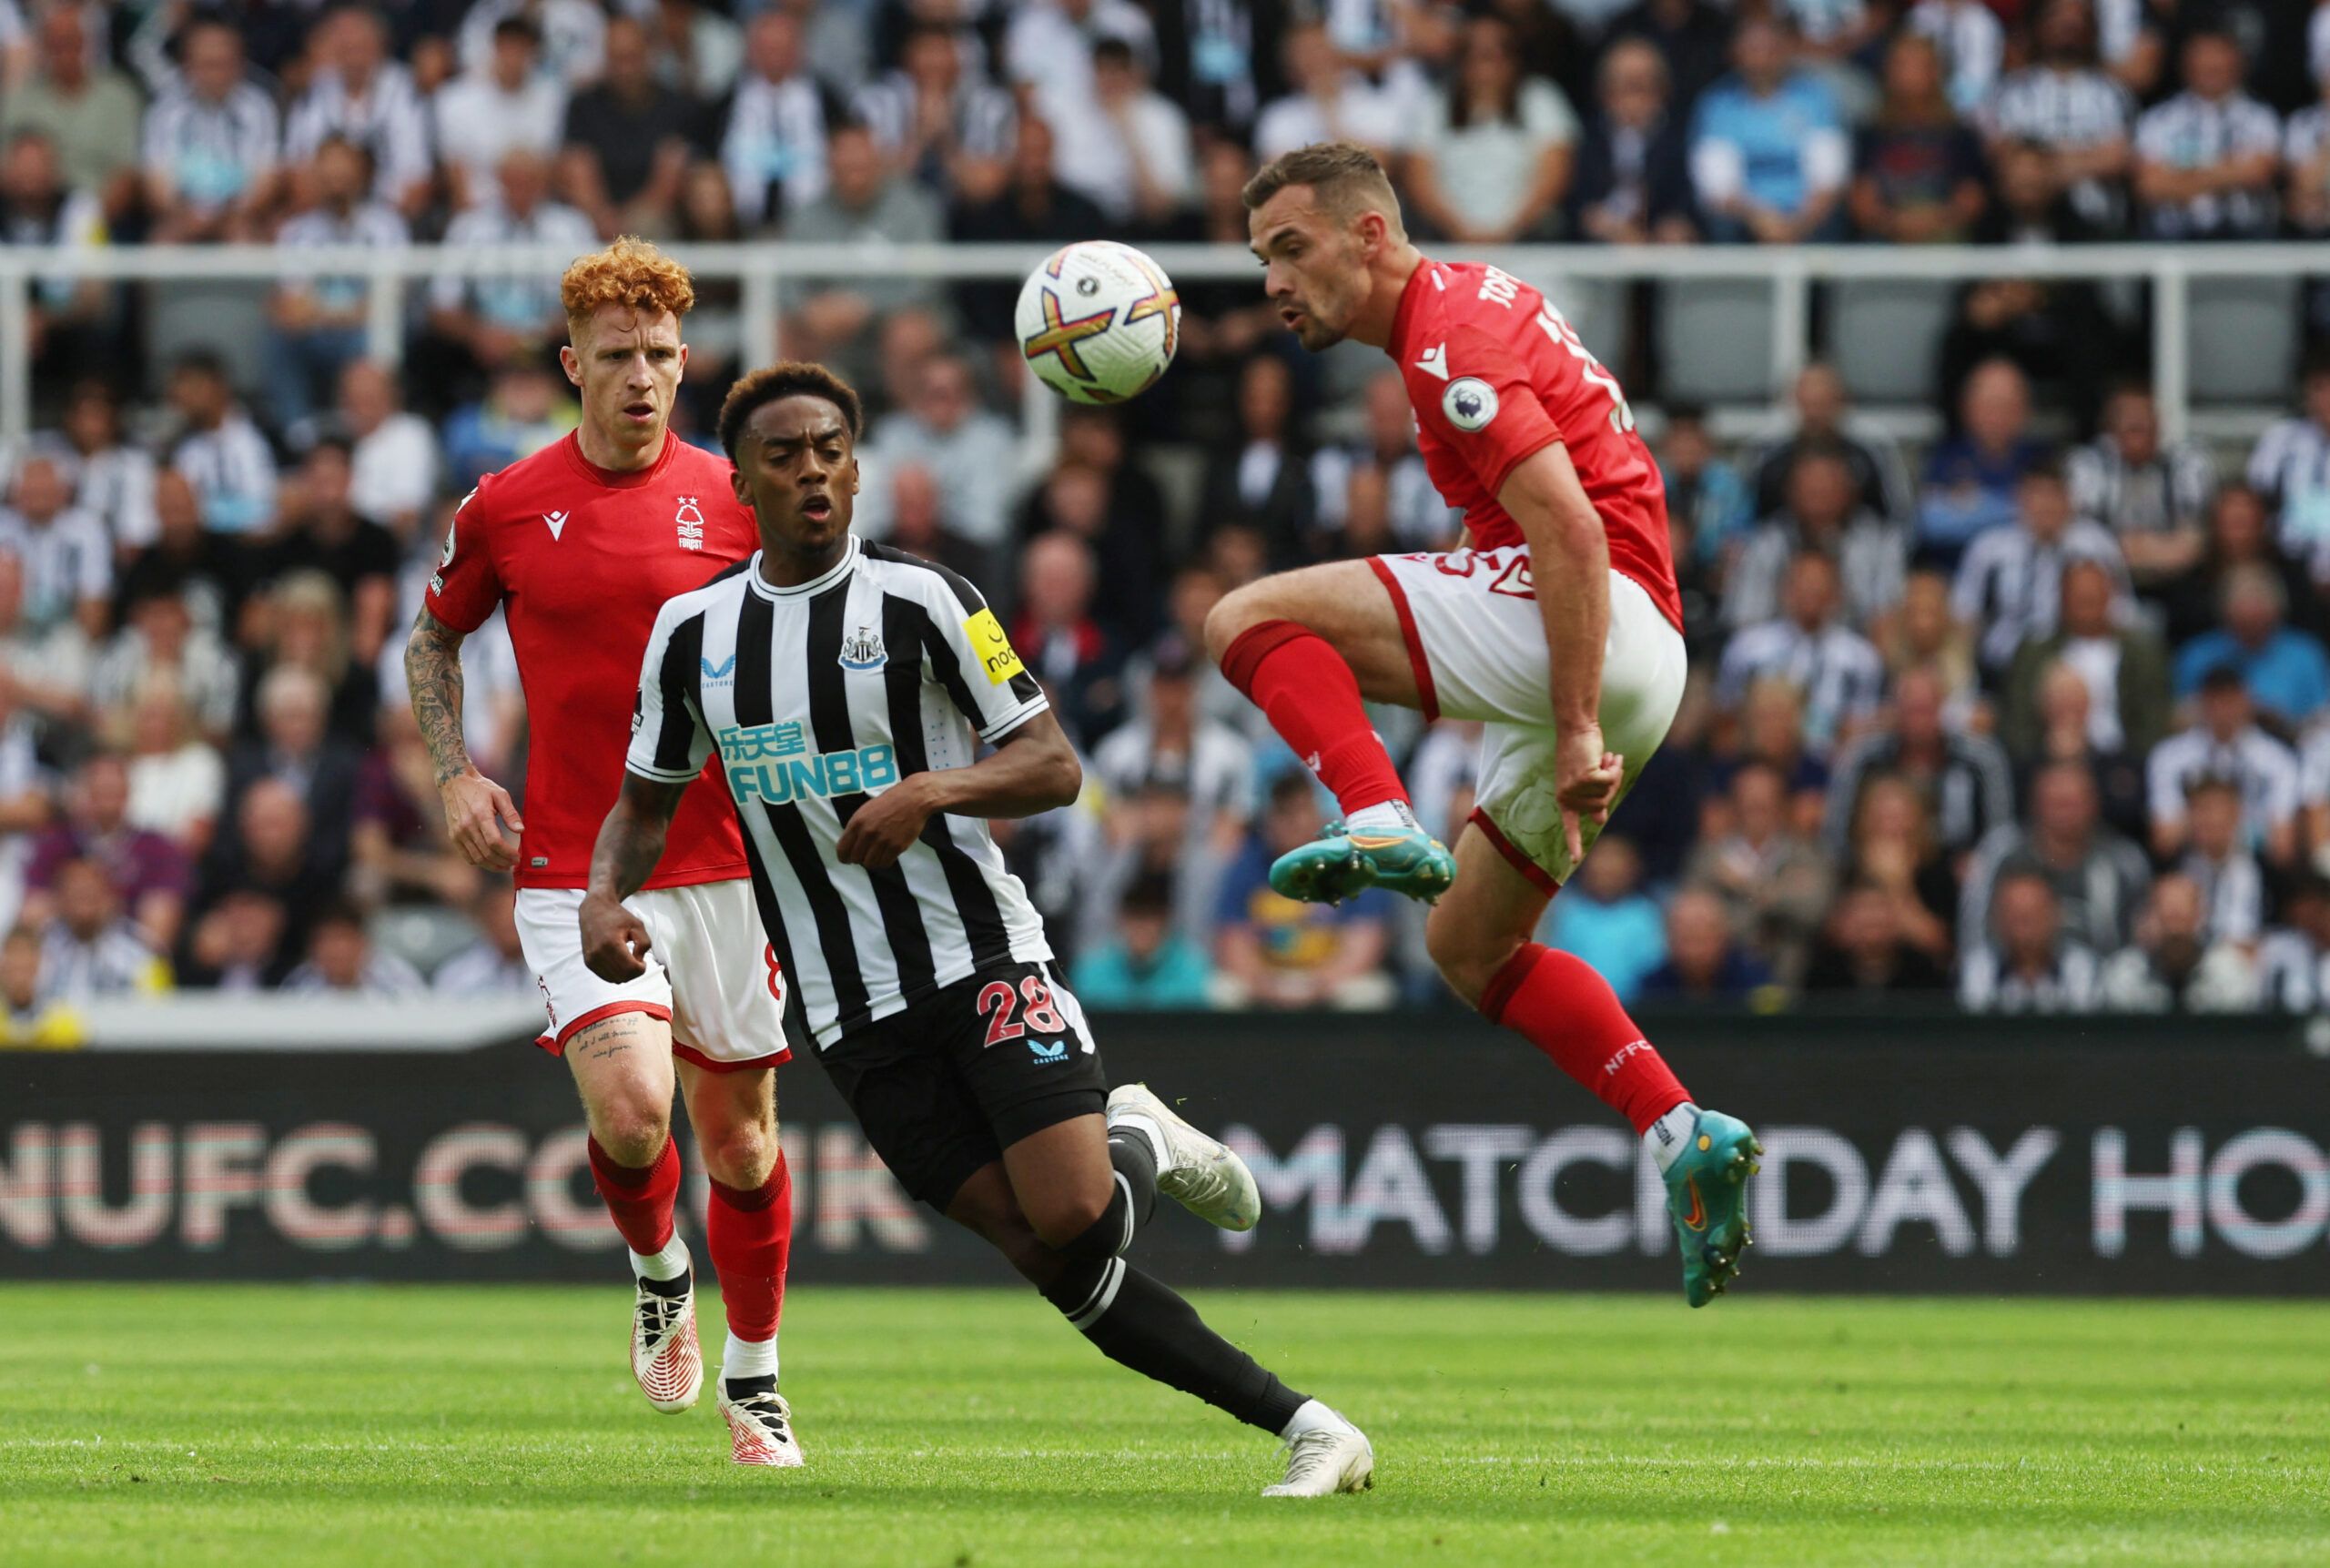 Soccer Football - Premier League - Newcastle United v Nottingham Forest - St James' Park, Newcastle, Britain - August 6, 2022 Newcastle United's Joe Willock in action with Nottingham Forest's Harry Toffolo and Jack Colback REUTERS/Russell Cheyne EDITORIAL USE ONLY. No use with unauthorized audio, video, data, fixture lists, club/league logos or 'live' services. Online in-match use limited to 75 images, no video emulation. No use in betting, games or single club /league/player publications.  Plea